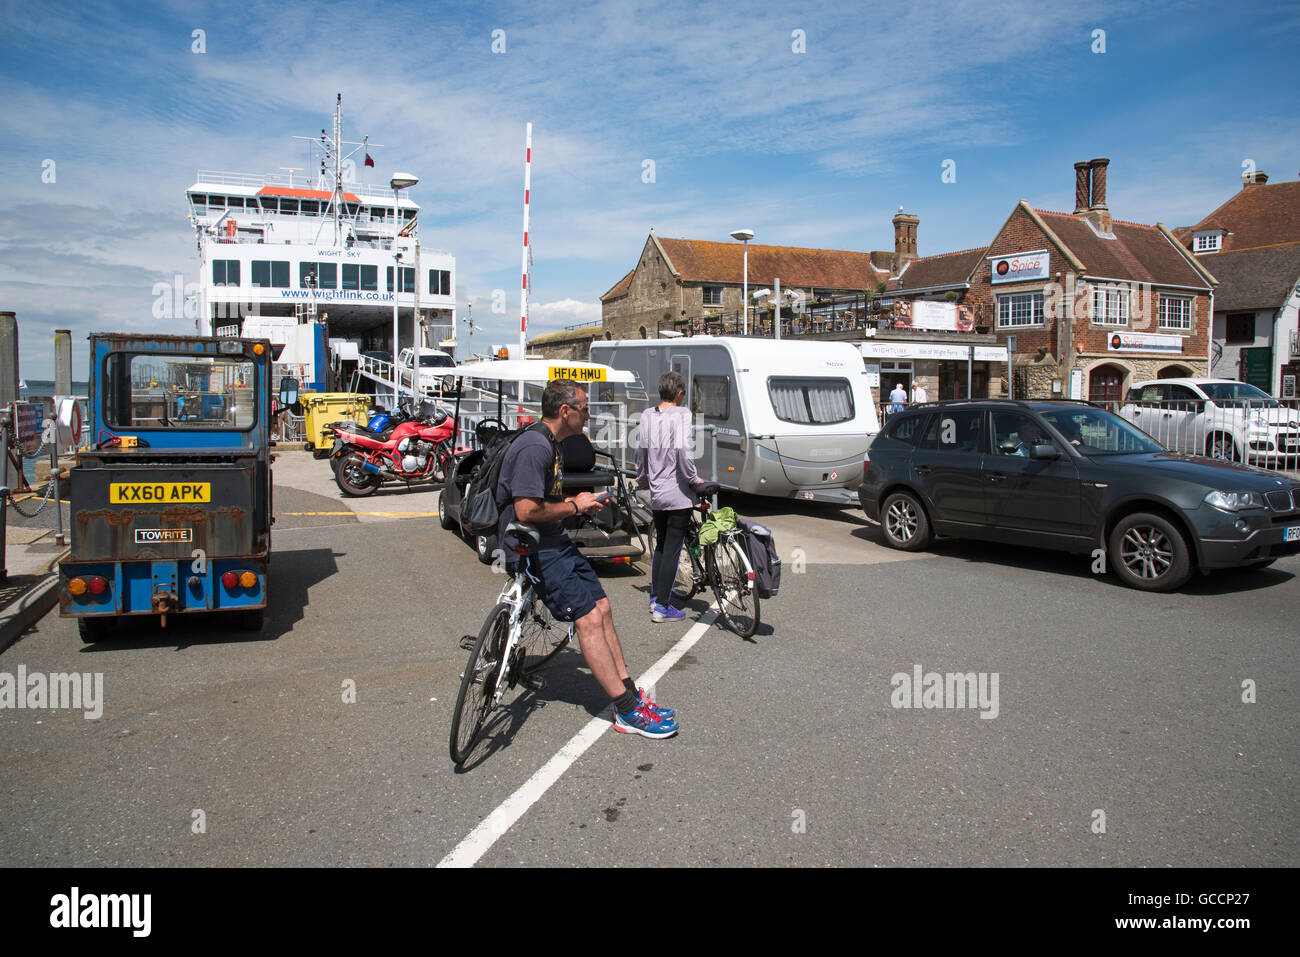 YARMOUTH HARBOUR ISLE OF WIGHT - Cyclists waiting to board a roll on roll off ferry berthed on the waterfront Stock Photo